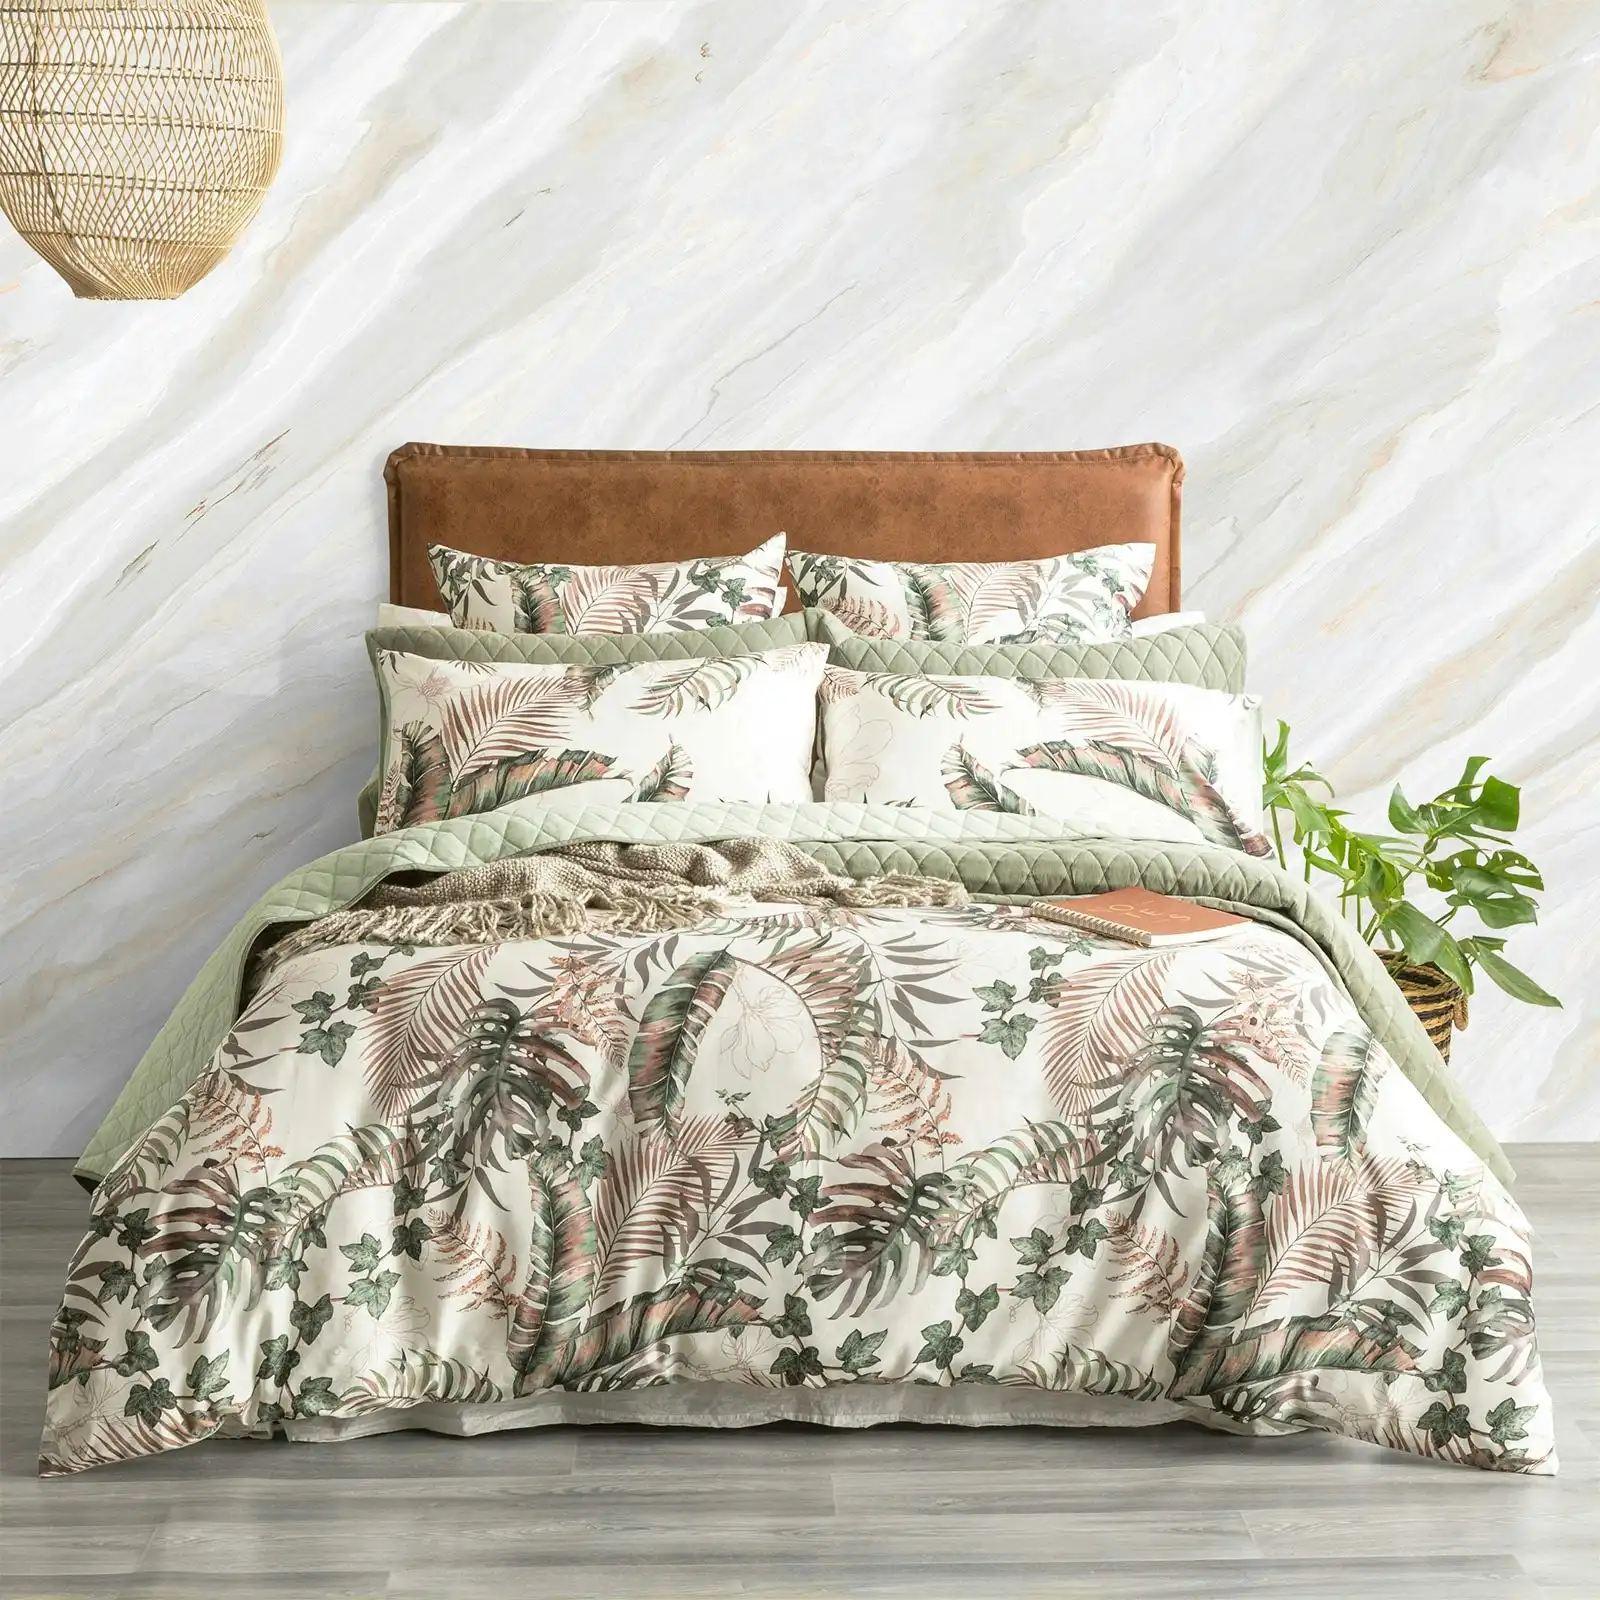 Palm Cove Pearl Quilt cover set 300 Thread Count Cotton Reversible